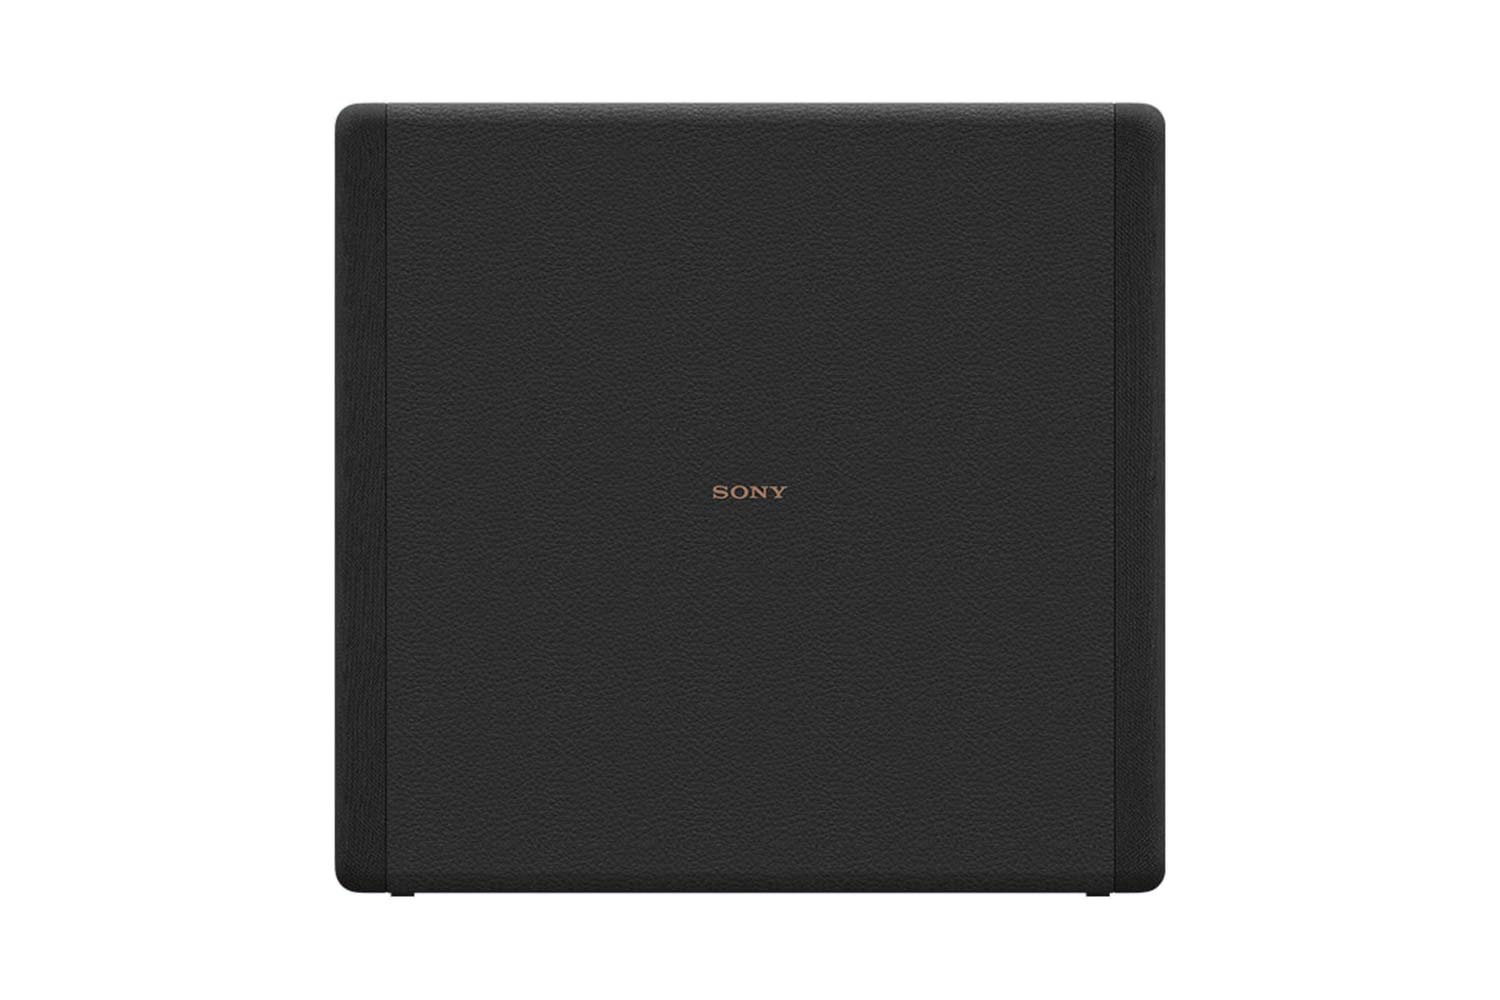 Sony SA-SW3 Subwoofer seite